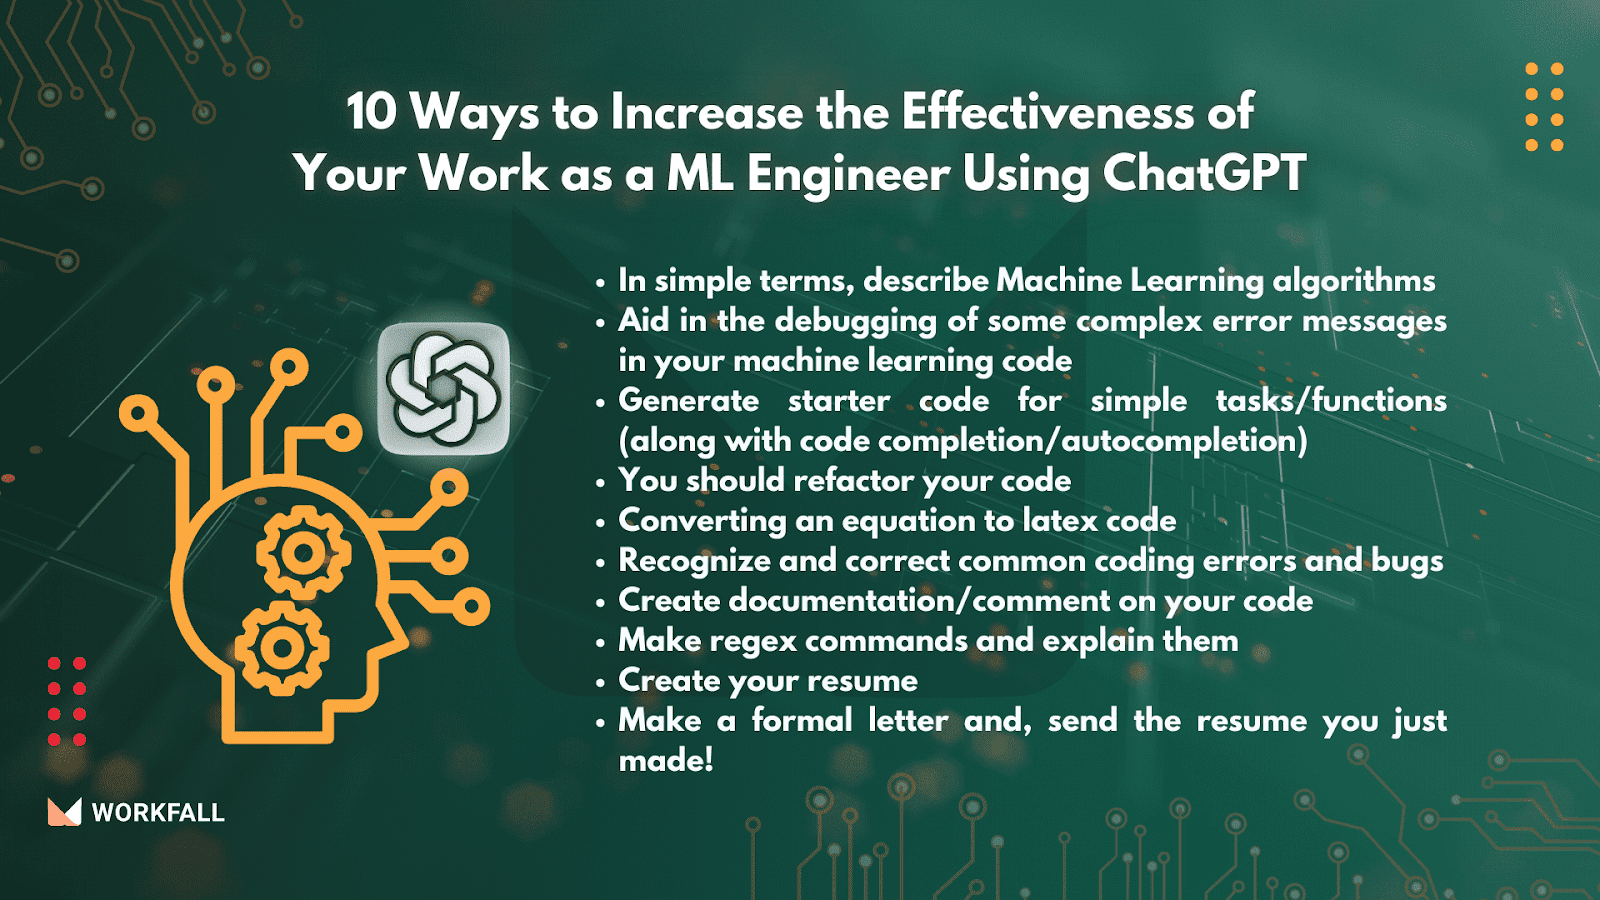 10 Ways to Increase the Effectiveness of Your Work as an ML Engineer Using ChatGPT